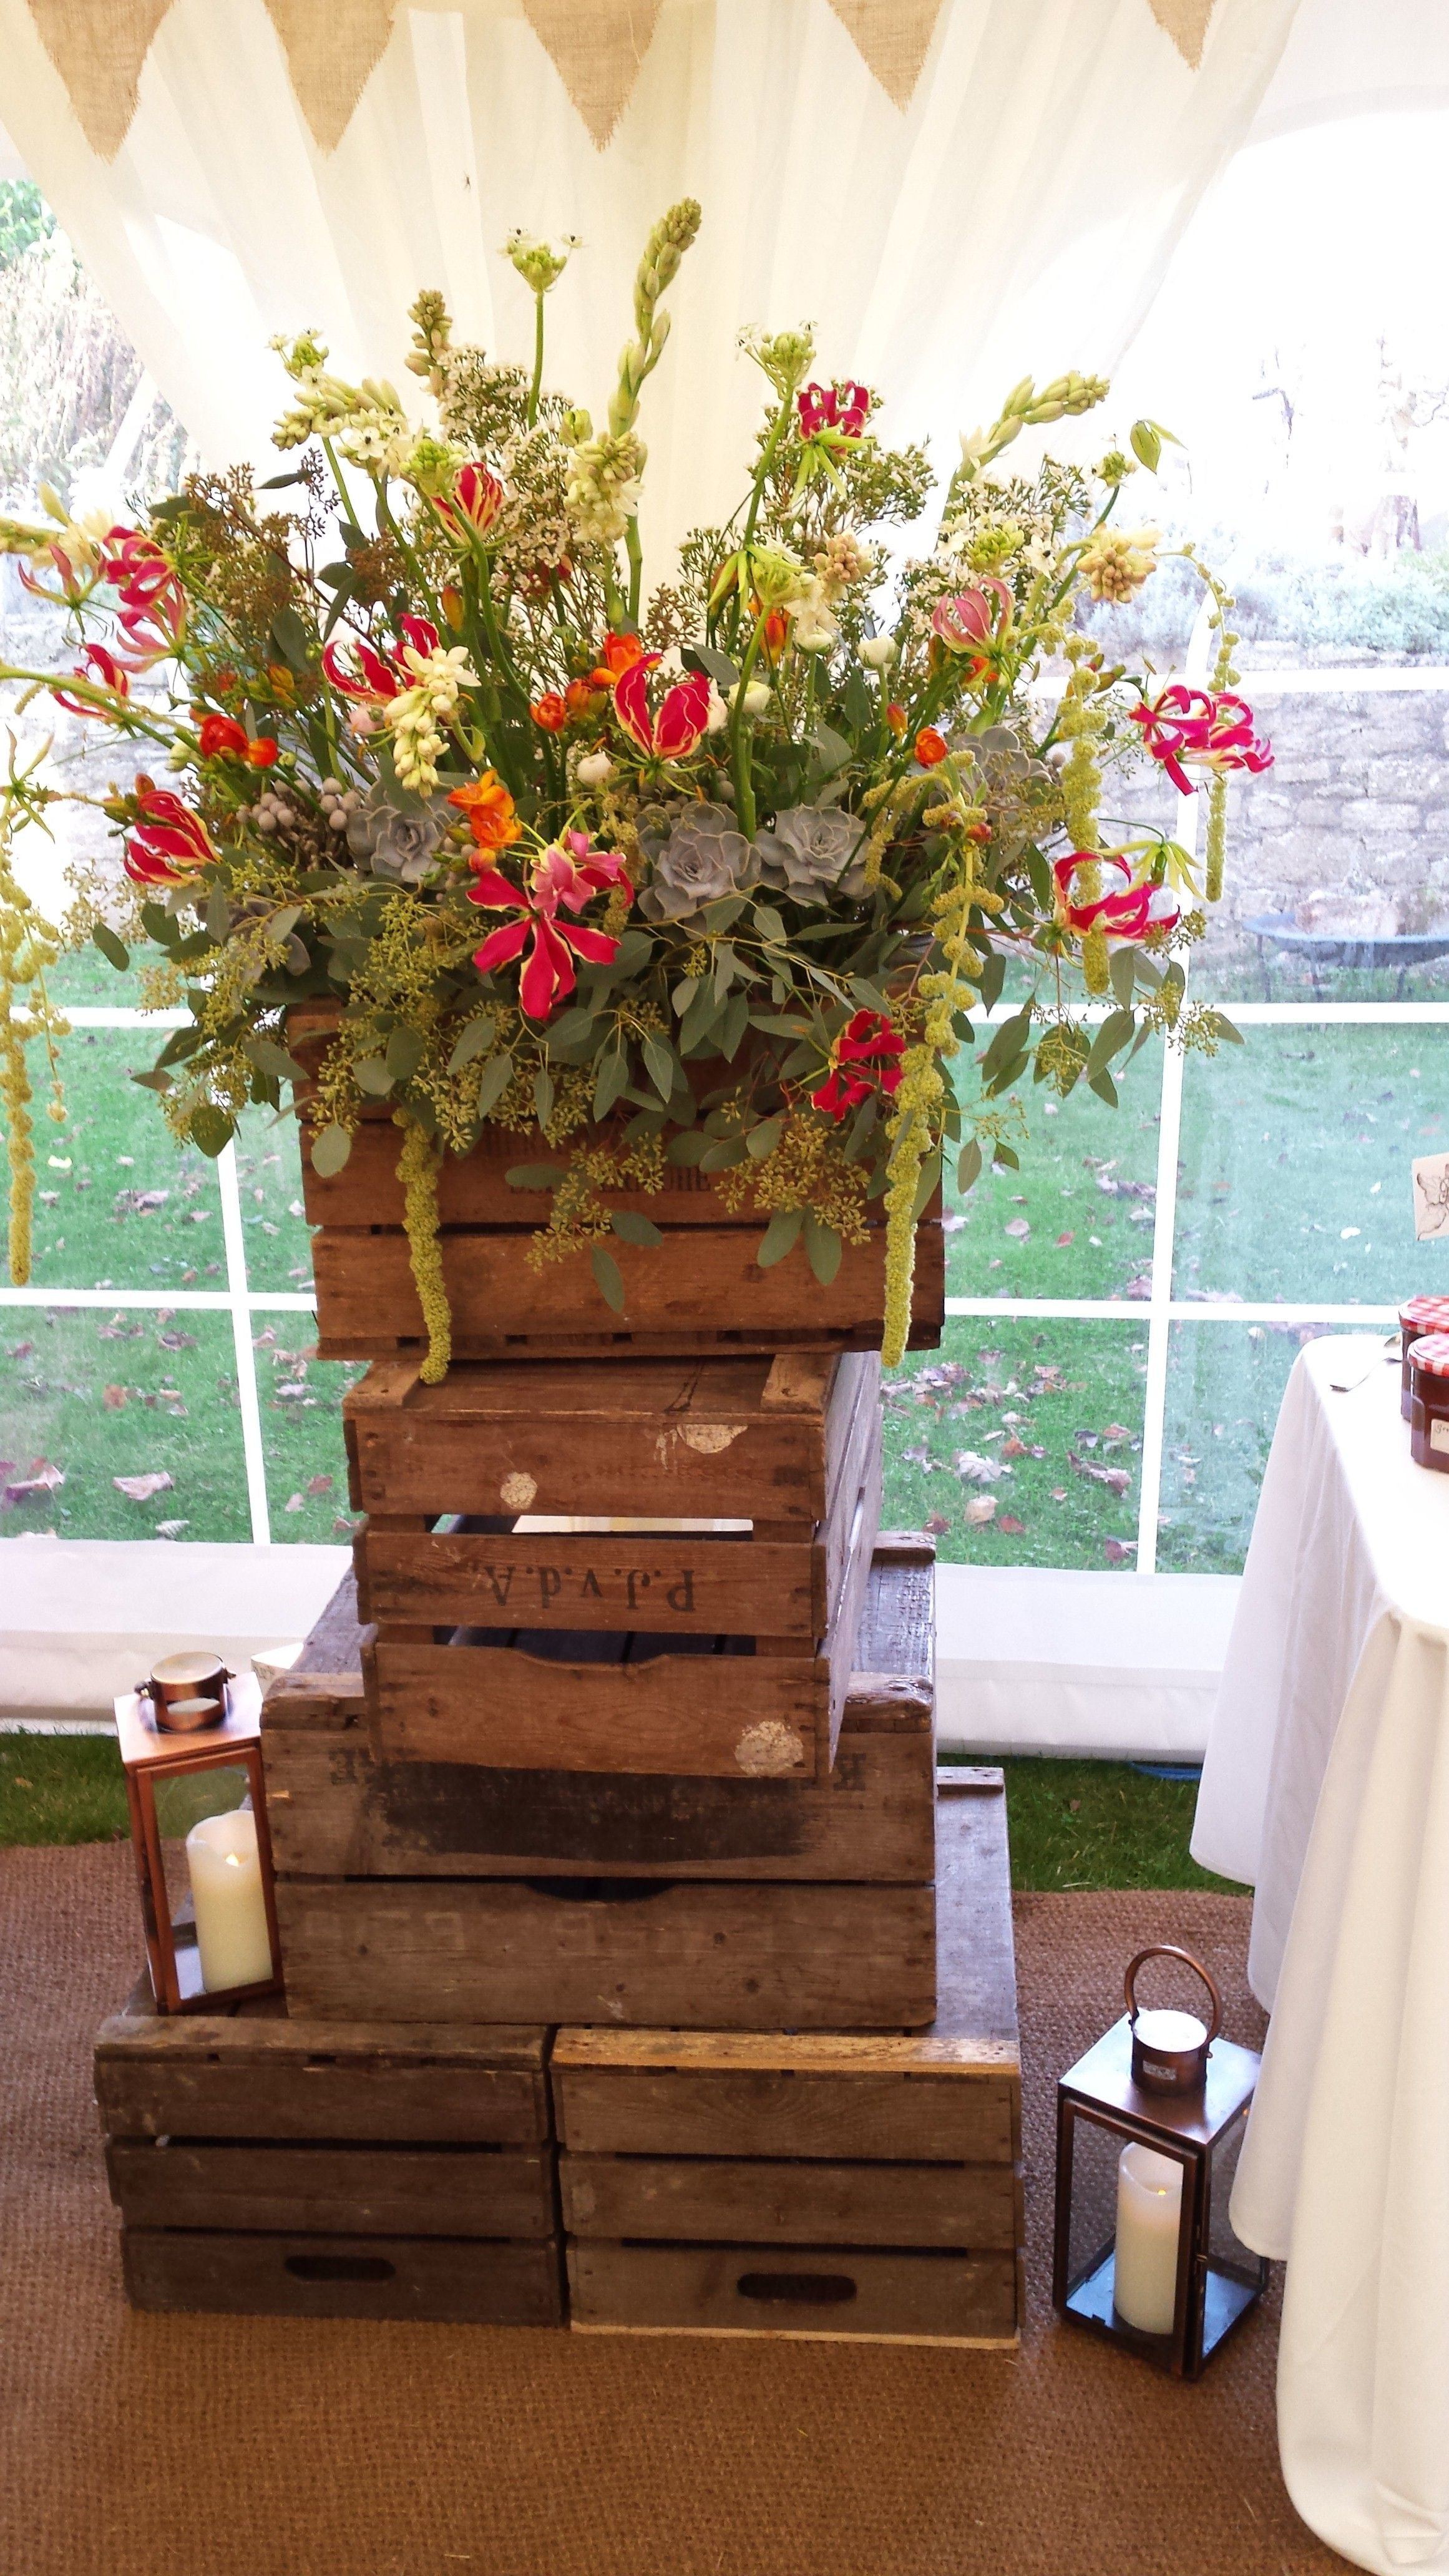 Wooden crate stacks with Wilde Bunch copper lanterns. A beautiful ...